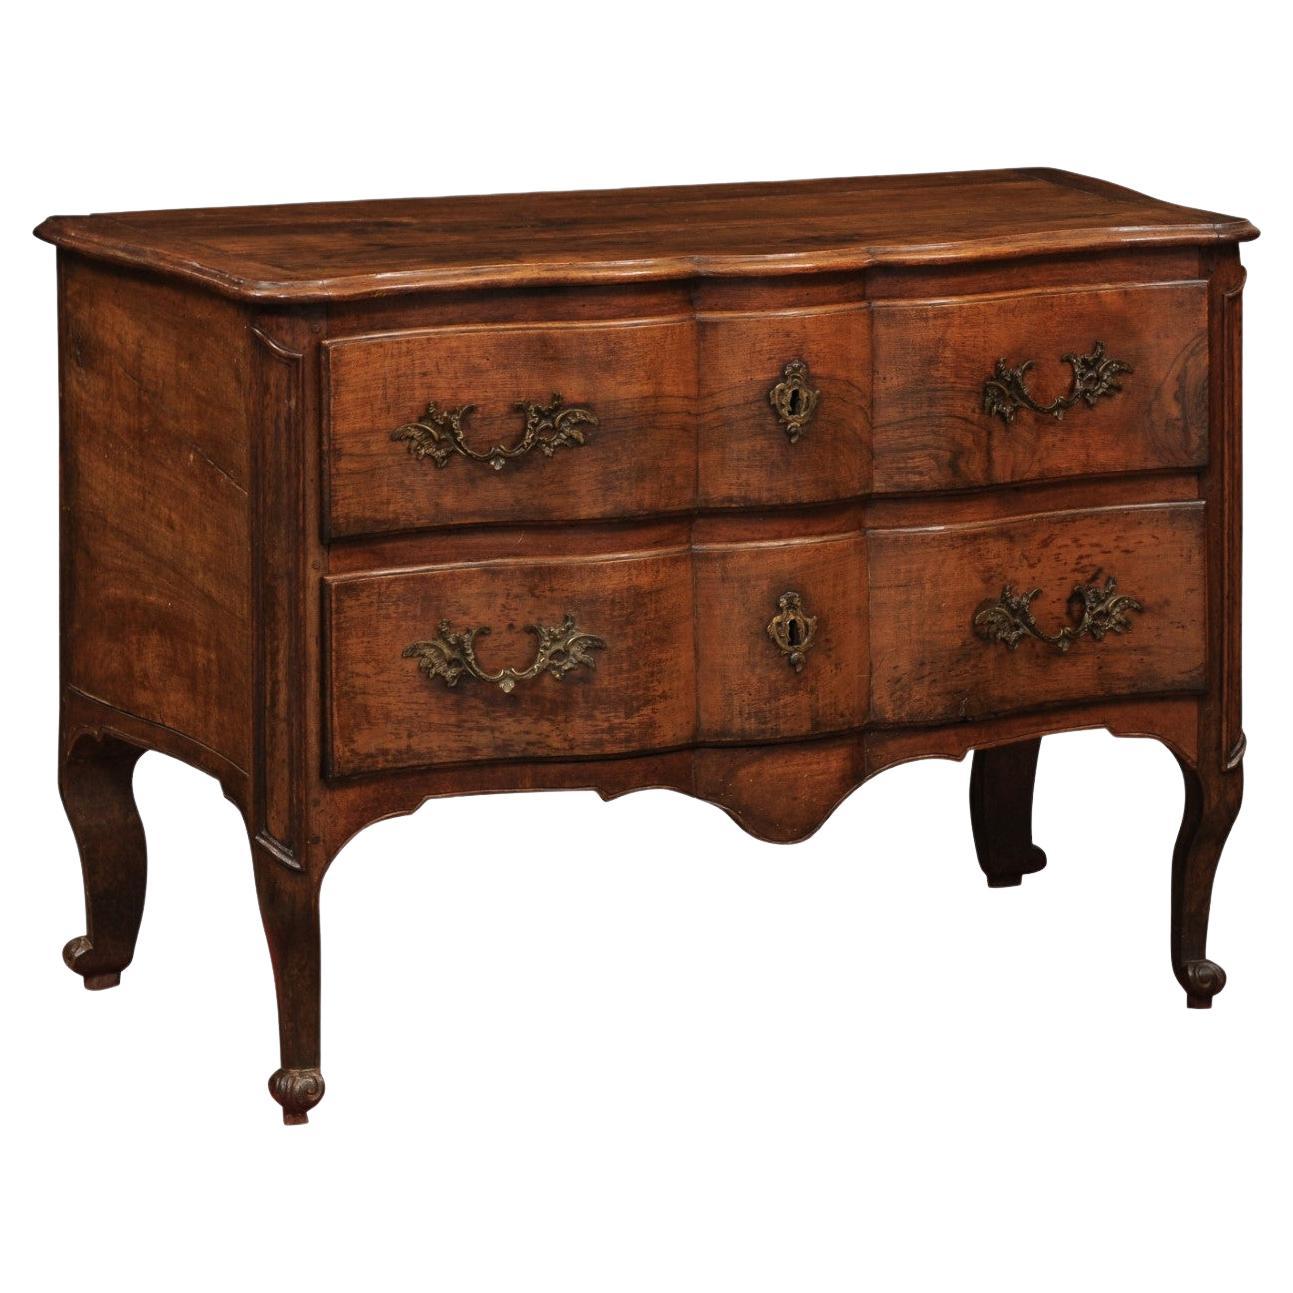  French 18th Century Louis XV Walnut Commode with 2 Drawers & Cabriole Legs